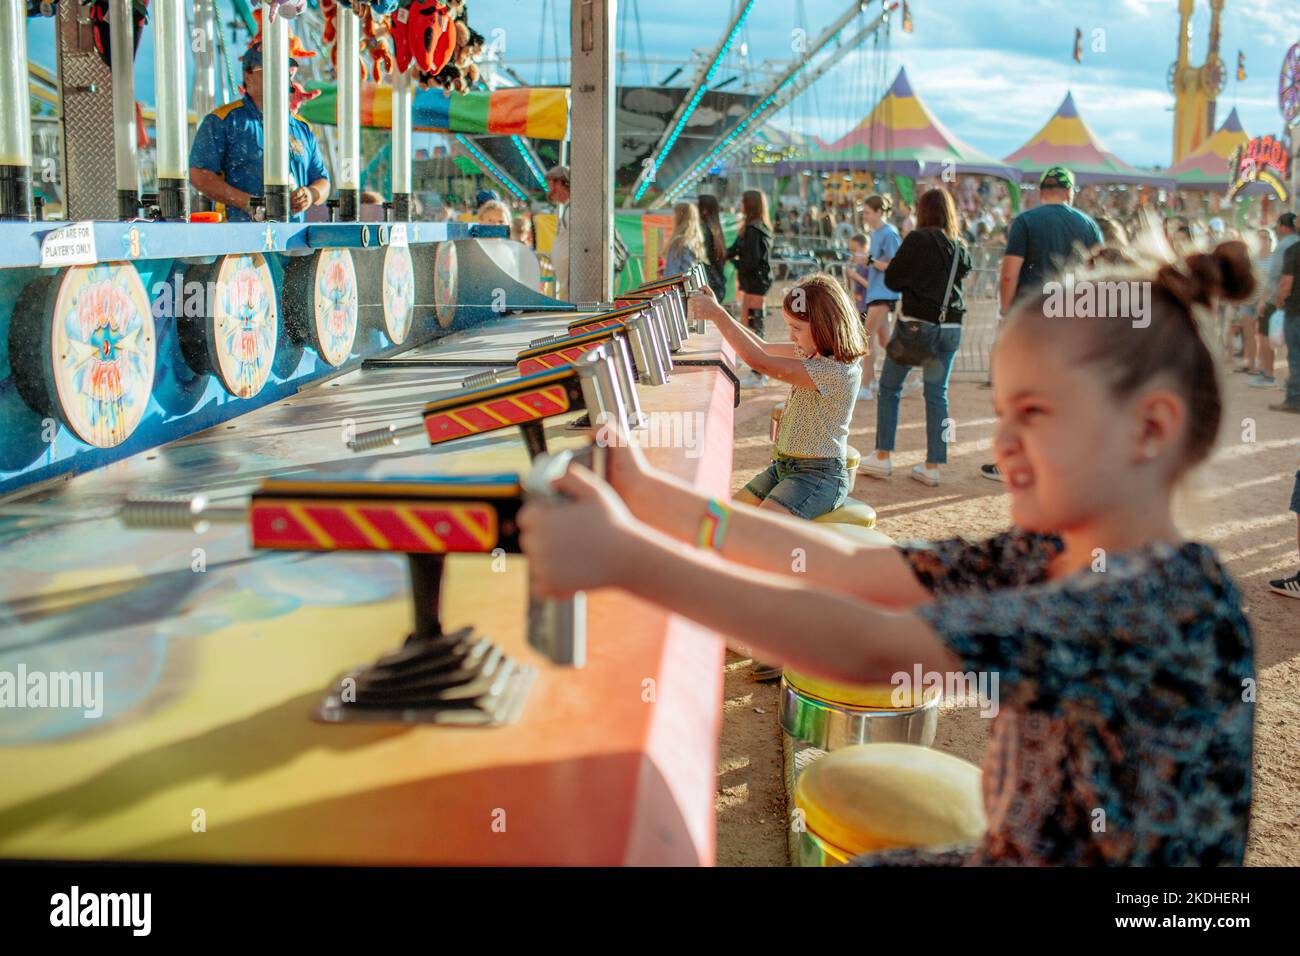 Two girls focused on carnival game on a sunny day Stock Photo